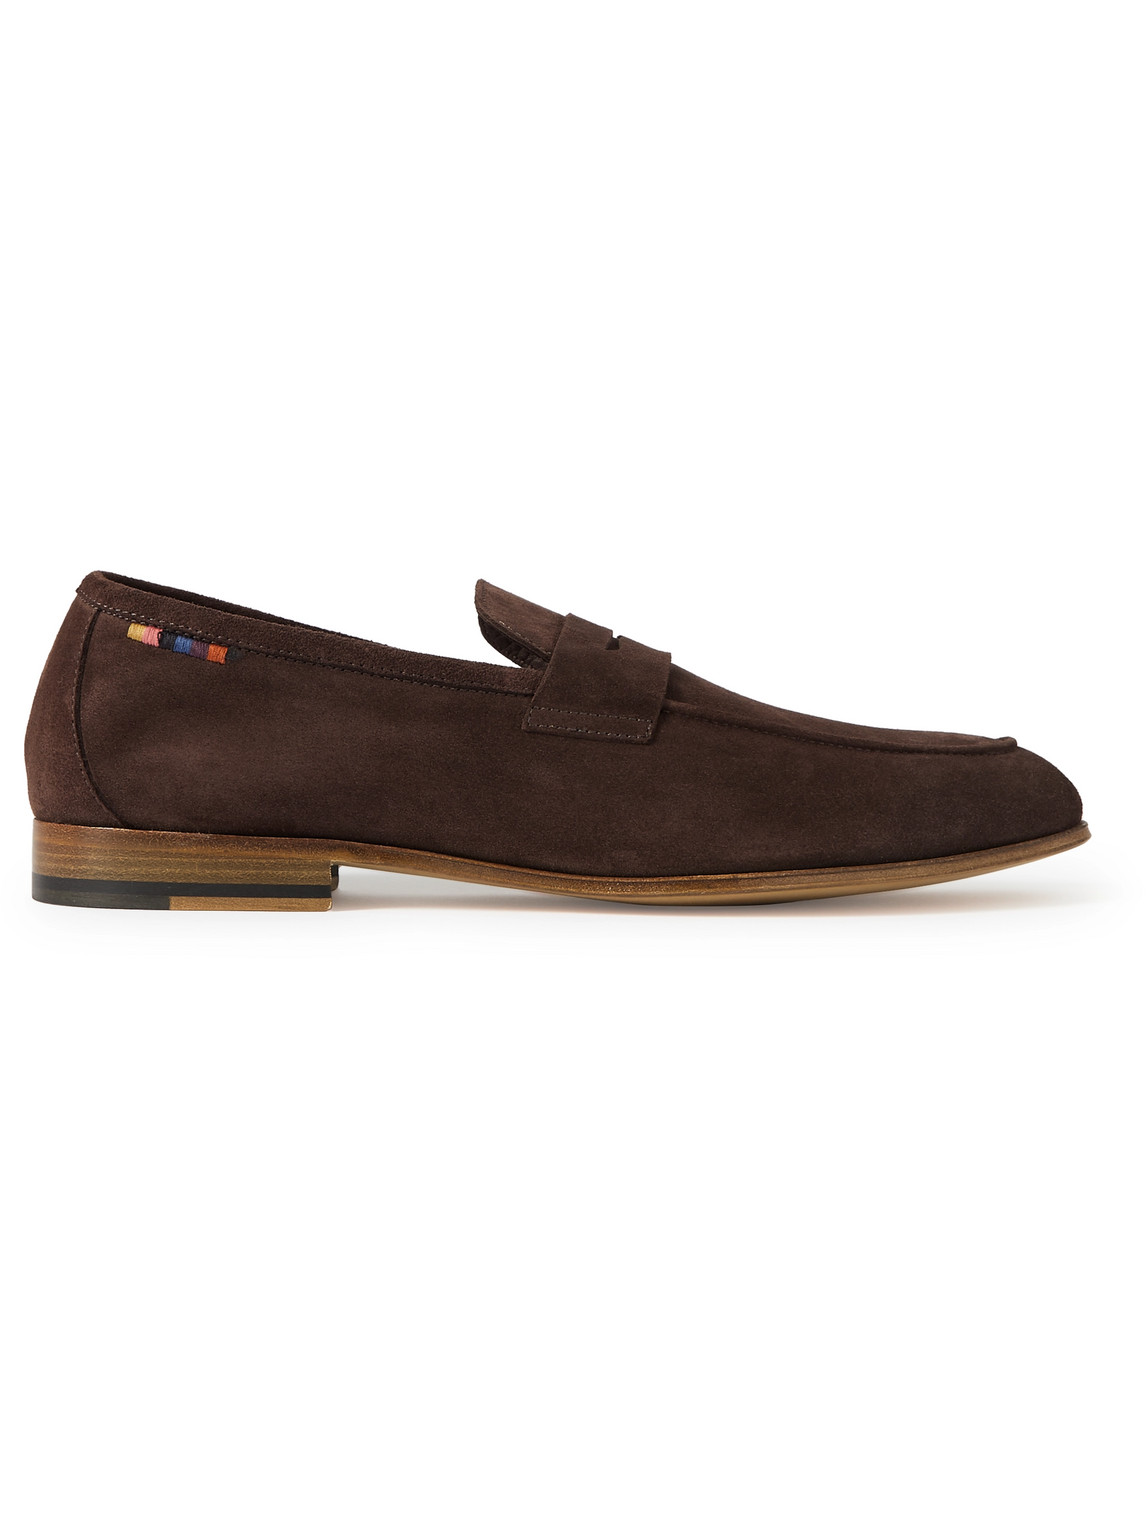 Paul Smith Livino Suede Penny Loafers In Brown